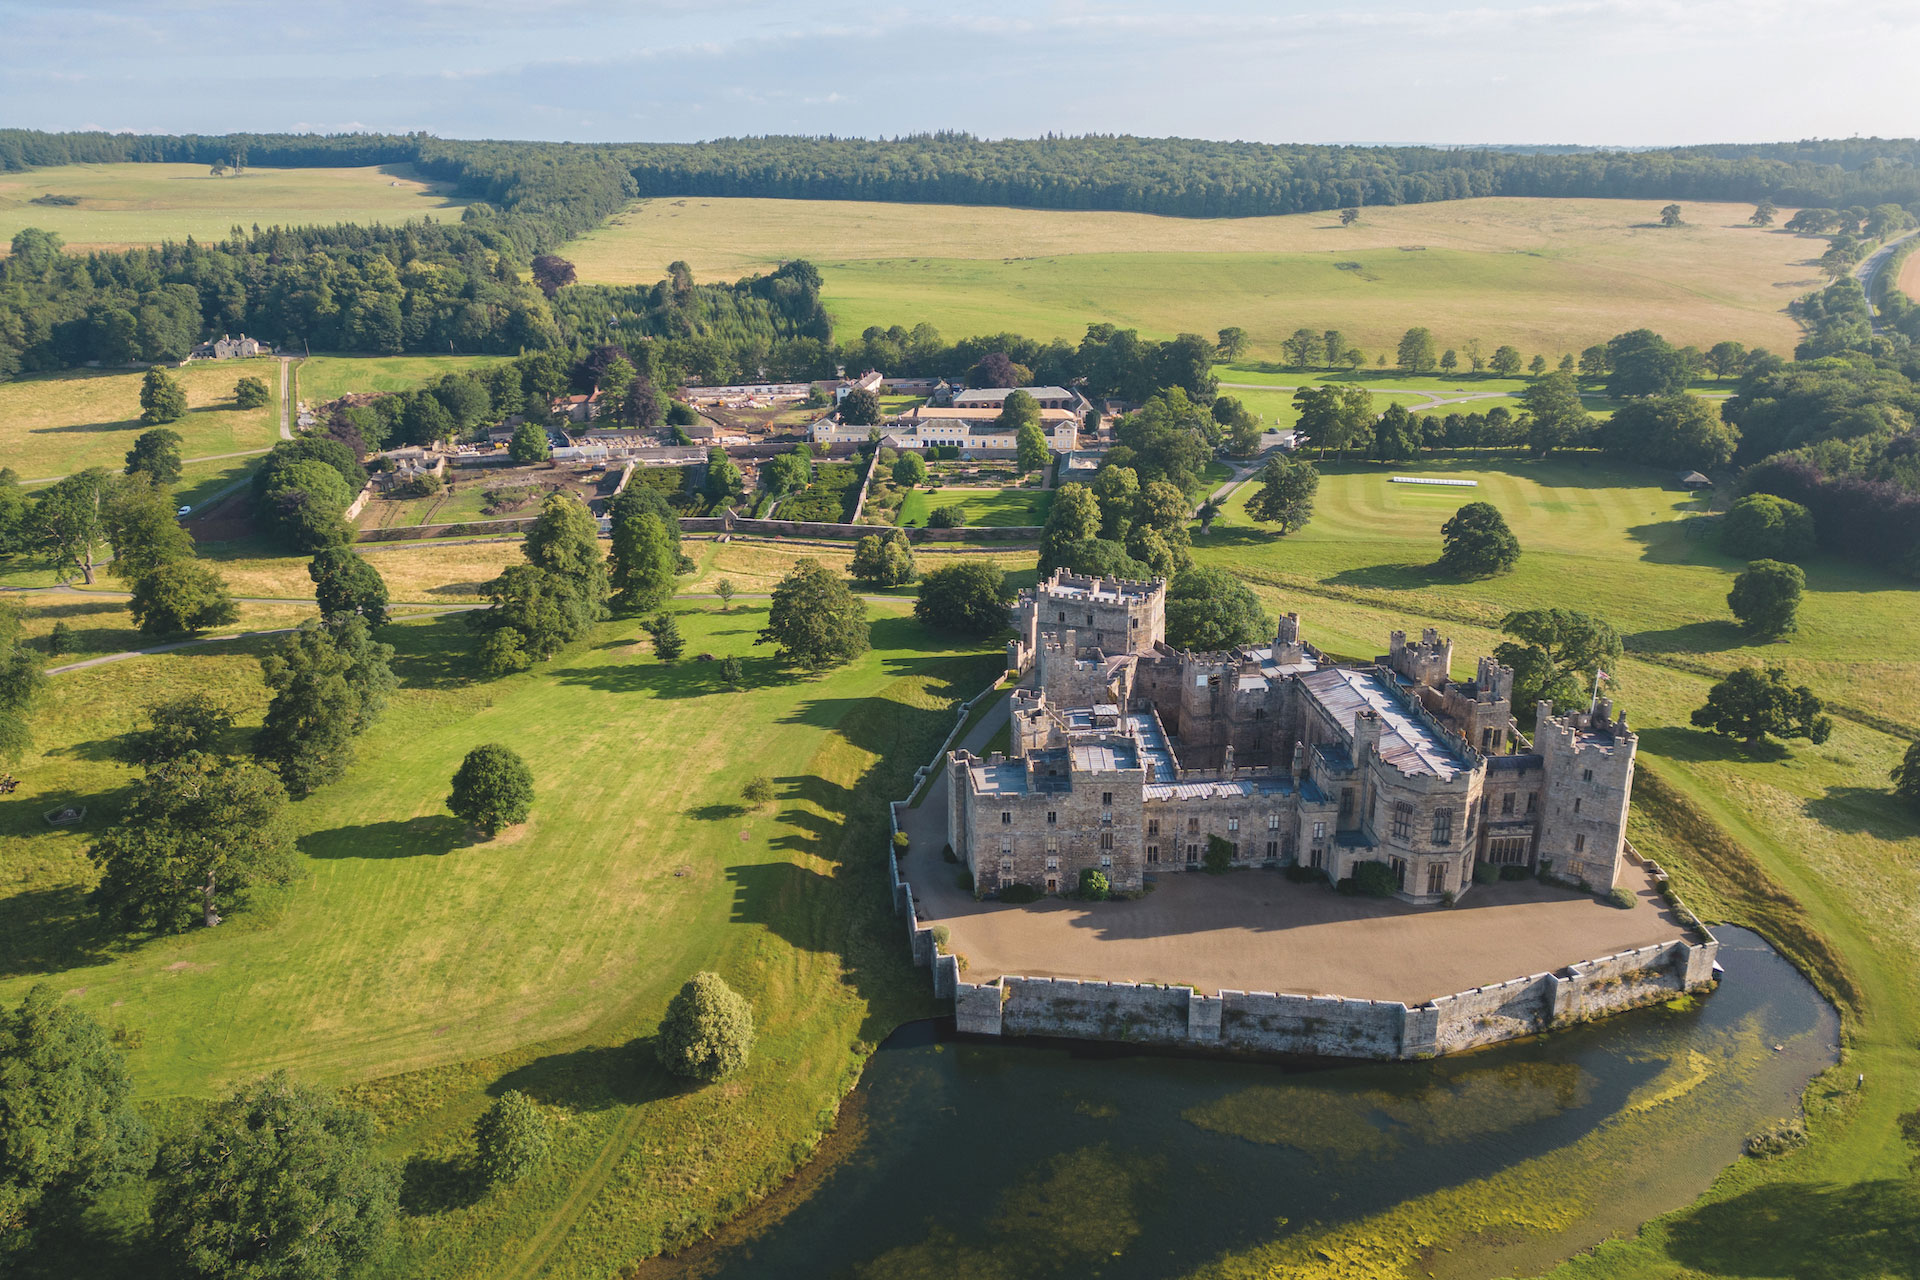 What Is It Really Like To Own a Castle?